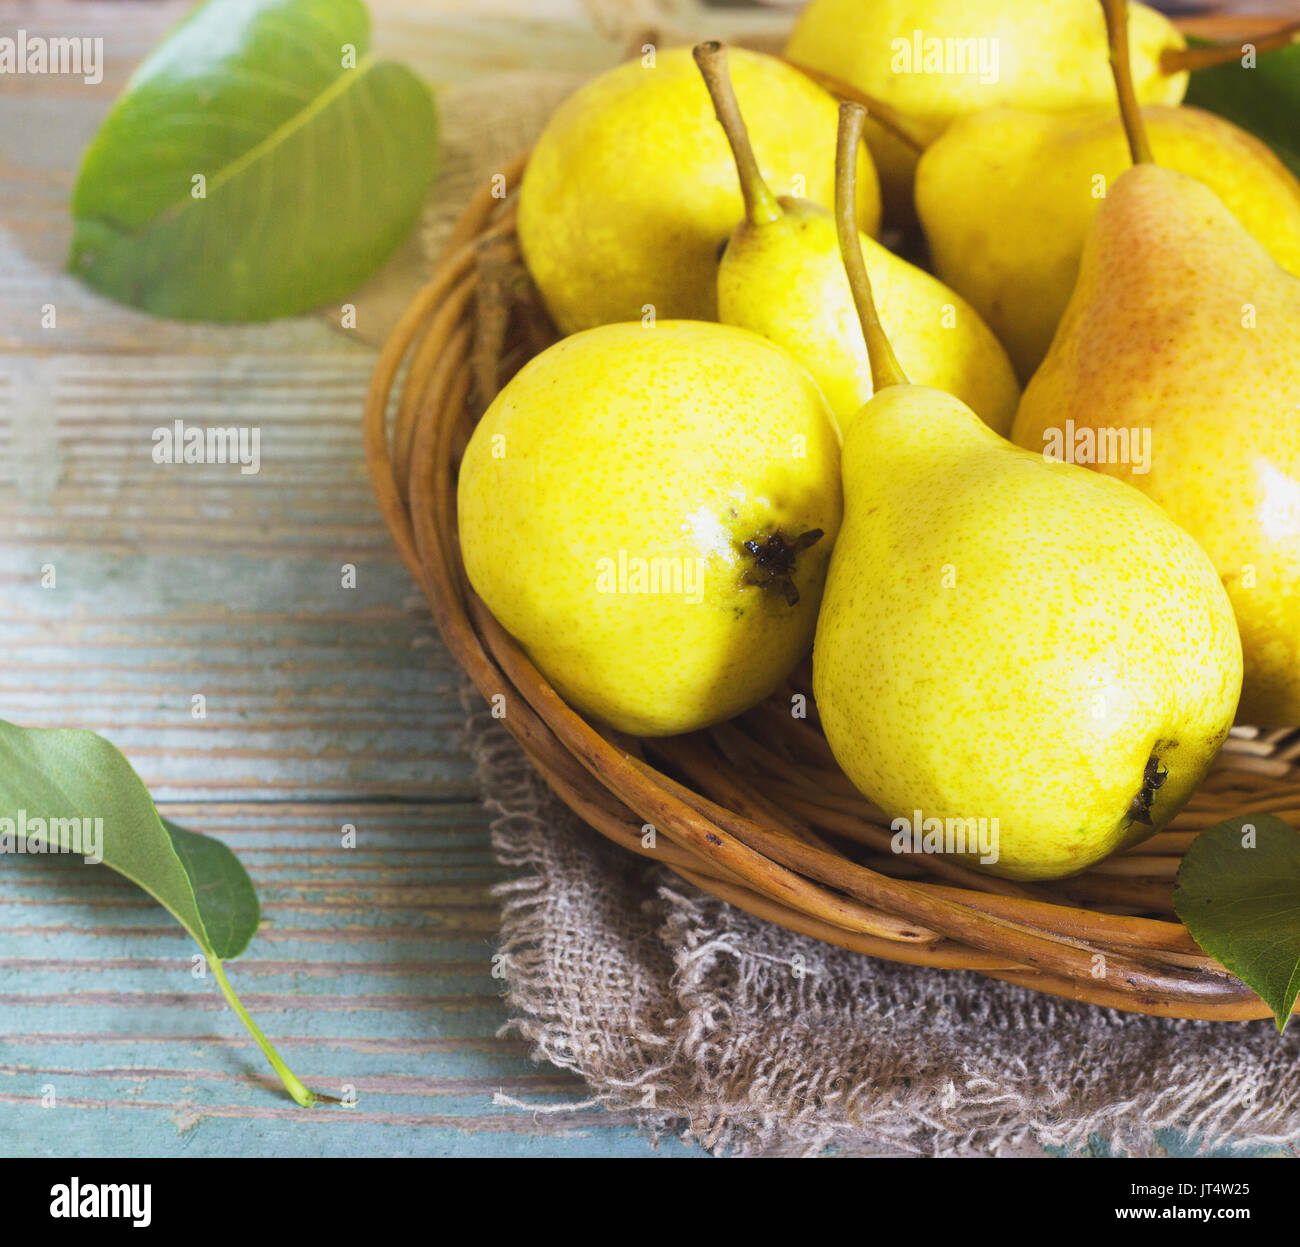 Wicker basket of ripe pears  close up Stock Photo